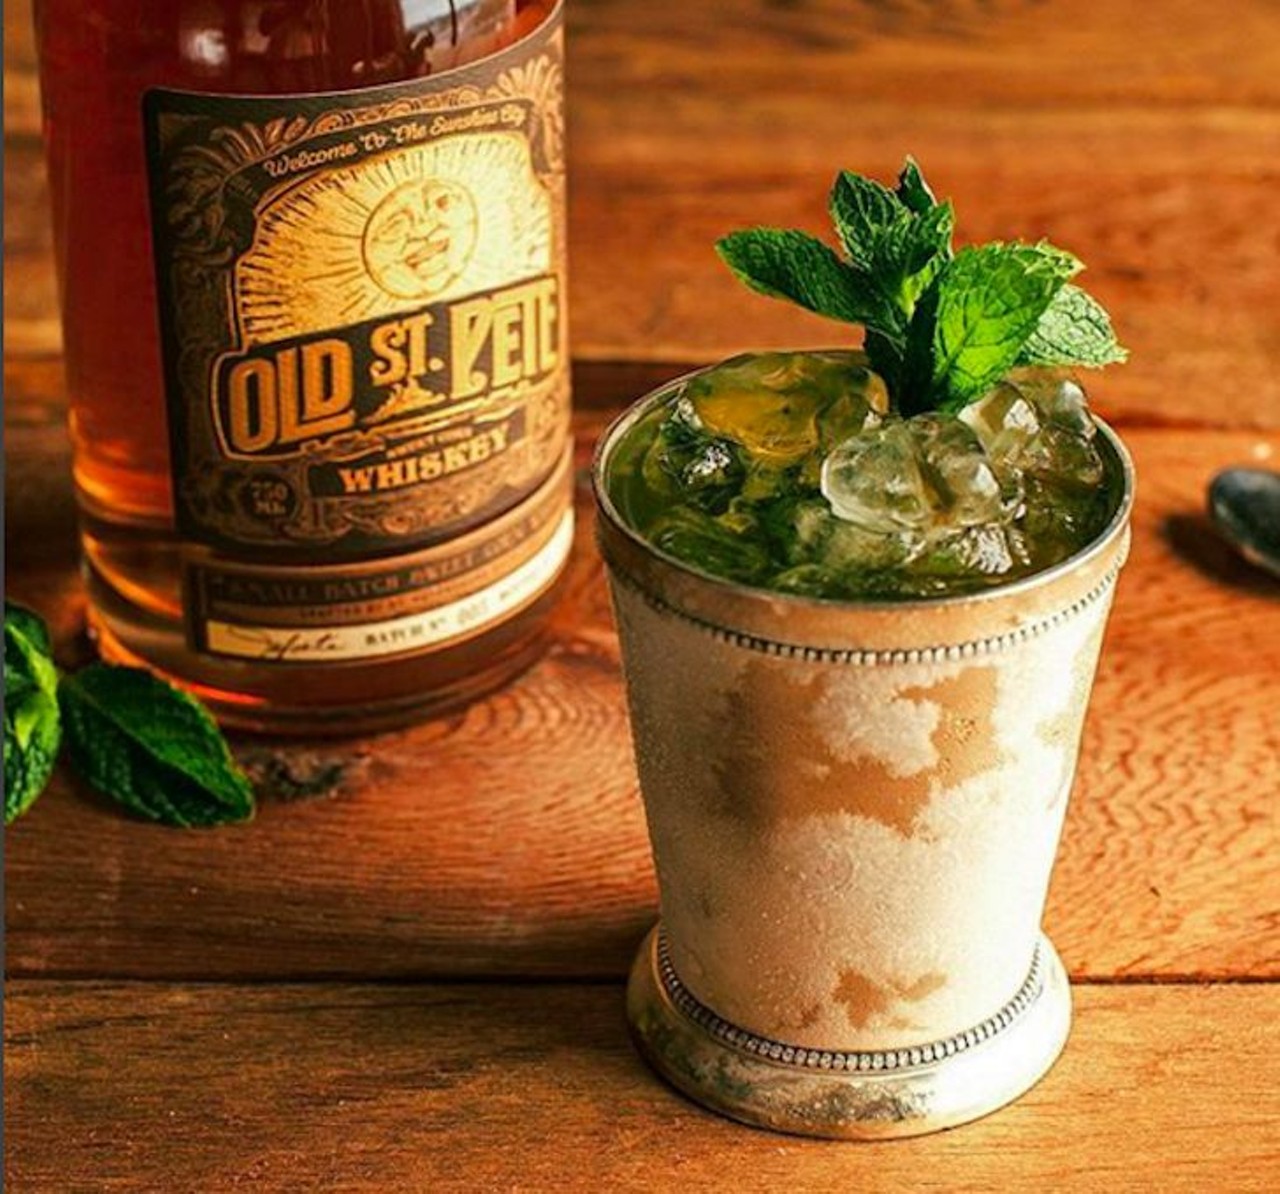 Old St. Pete Sweet Corn Whiskey